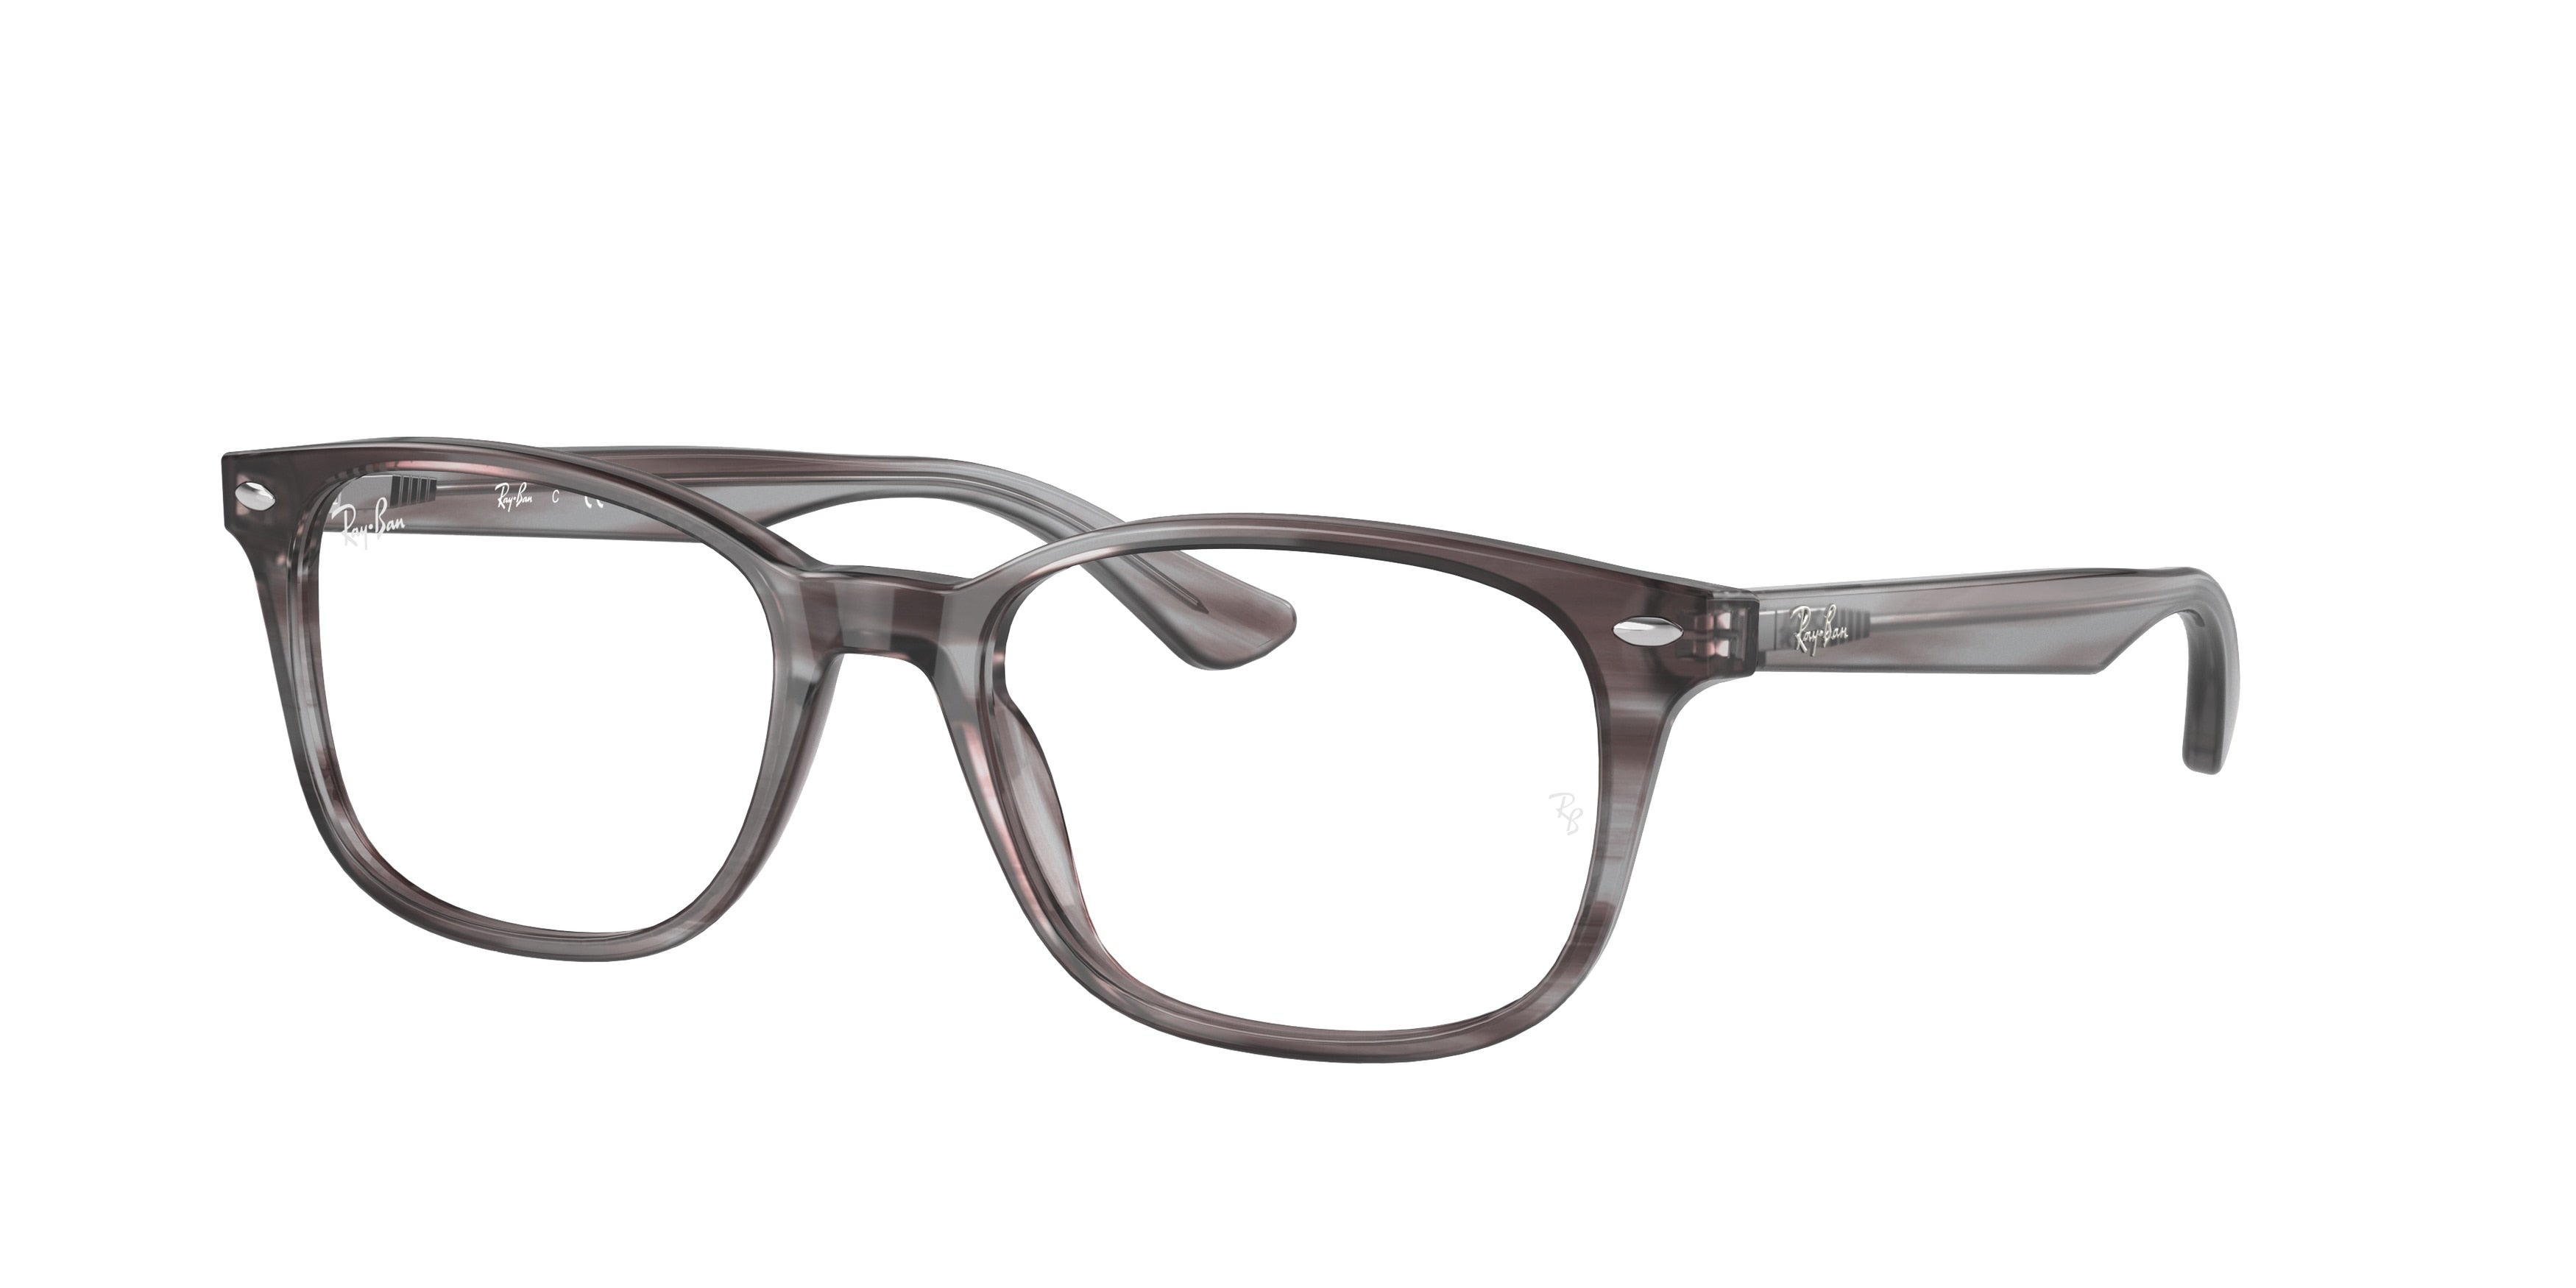 Ray-Ban Optical RX5375 Square Eyeglasses  8055-Striped Grey 53-145-18 - Color Map Grey